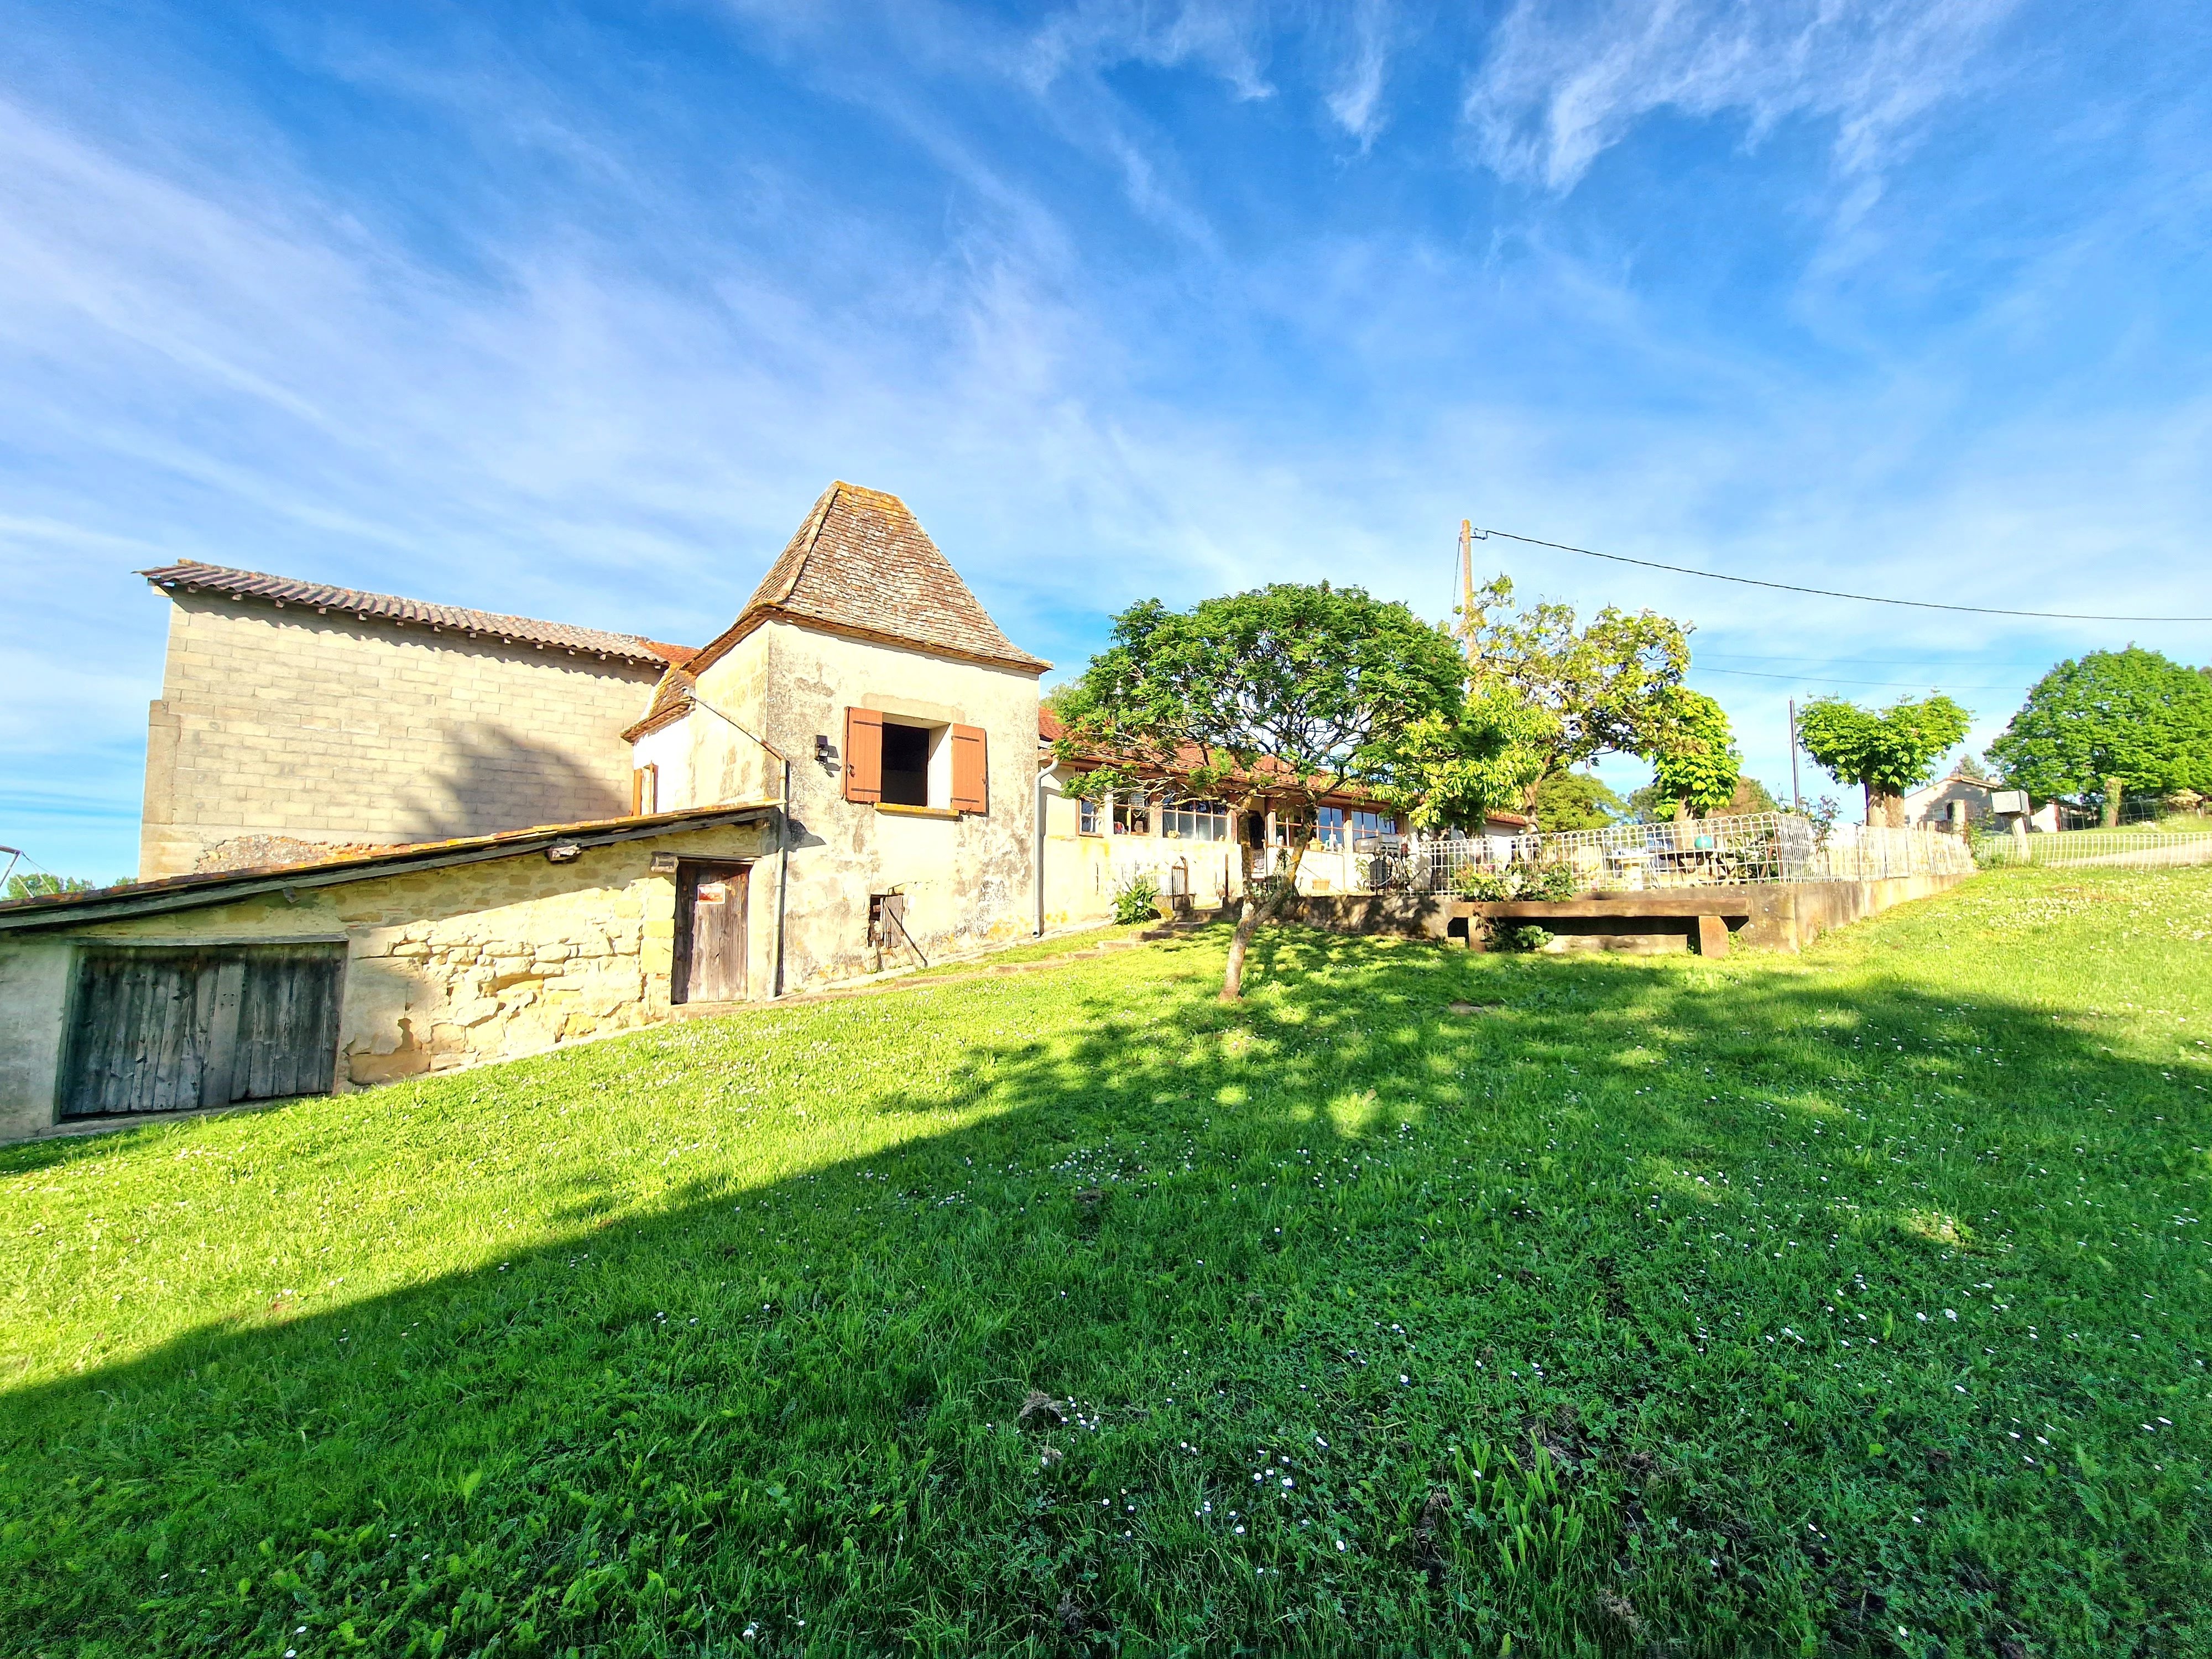 3 bedroom stone house with attached barn and land